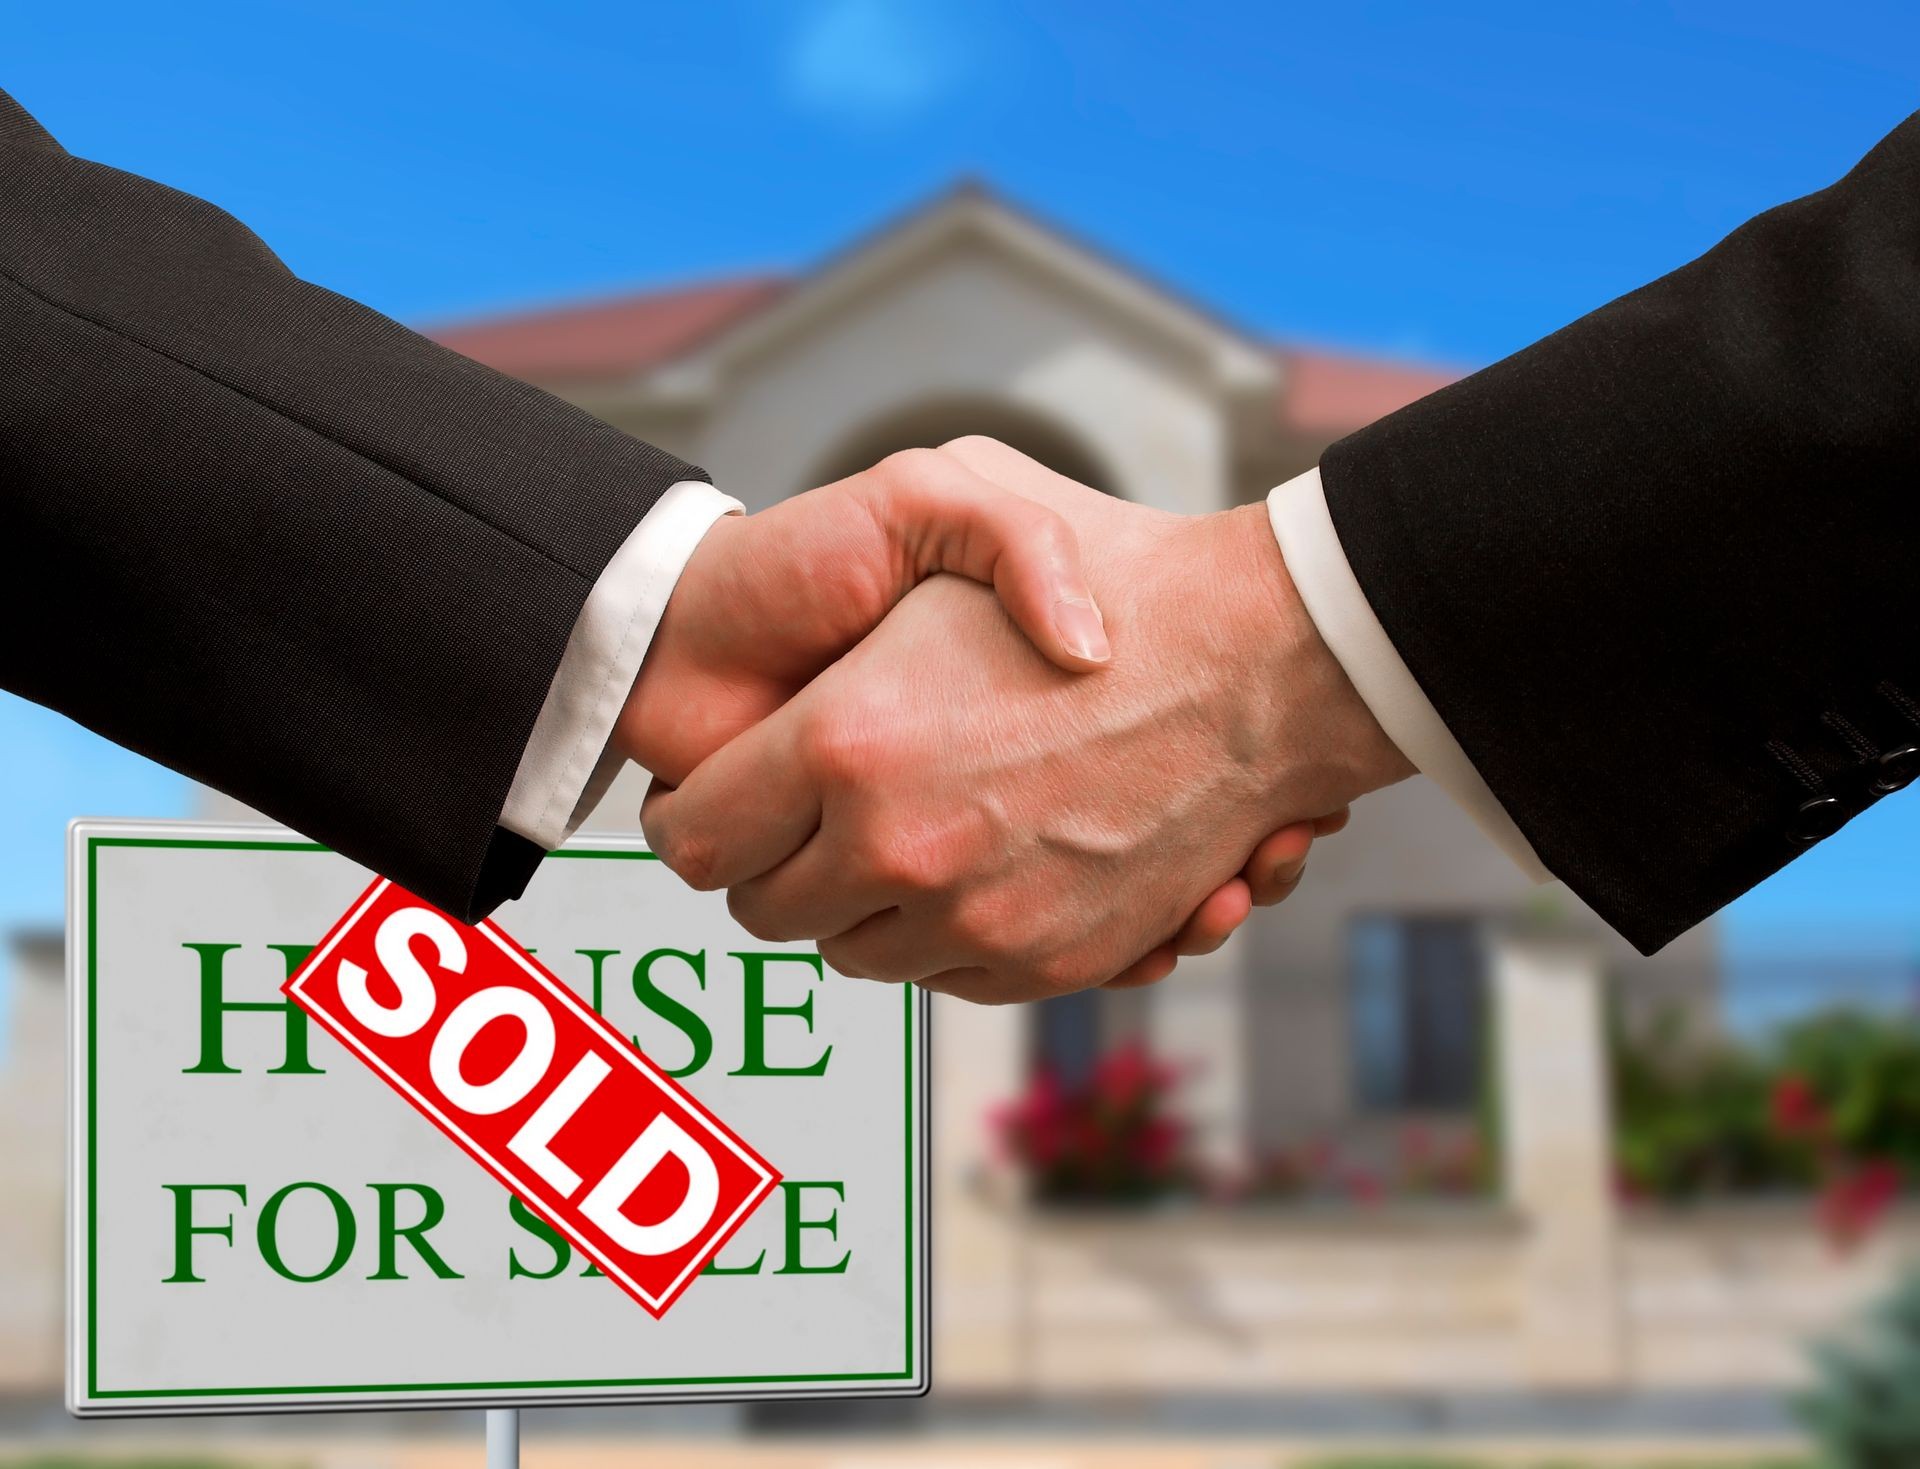 Home For Sale Real Estate Sign in Front of Beautiful New House Sold. Blurred background. Handshake business deal. Communication commerce real estate. Corporate concept